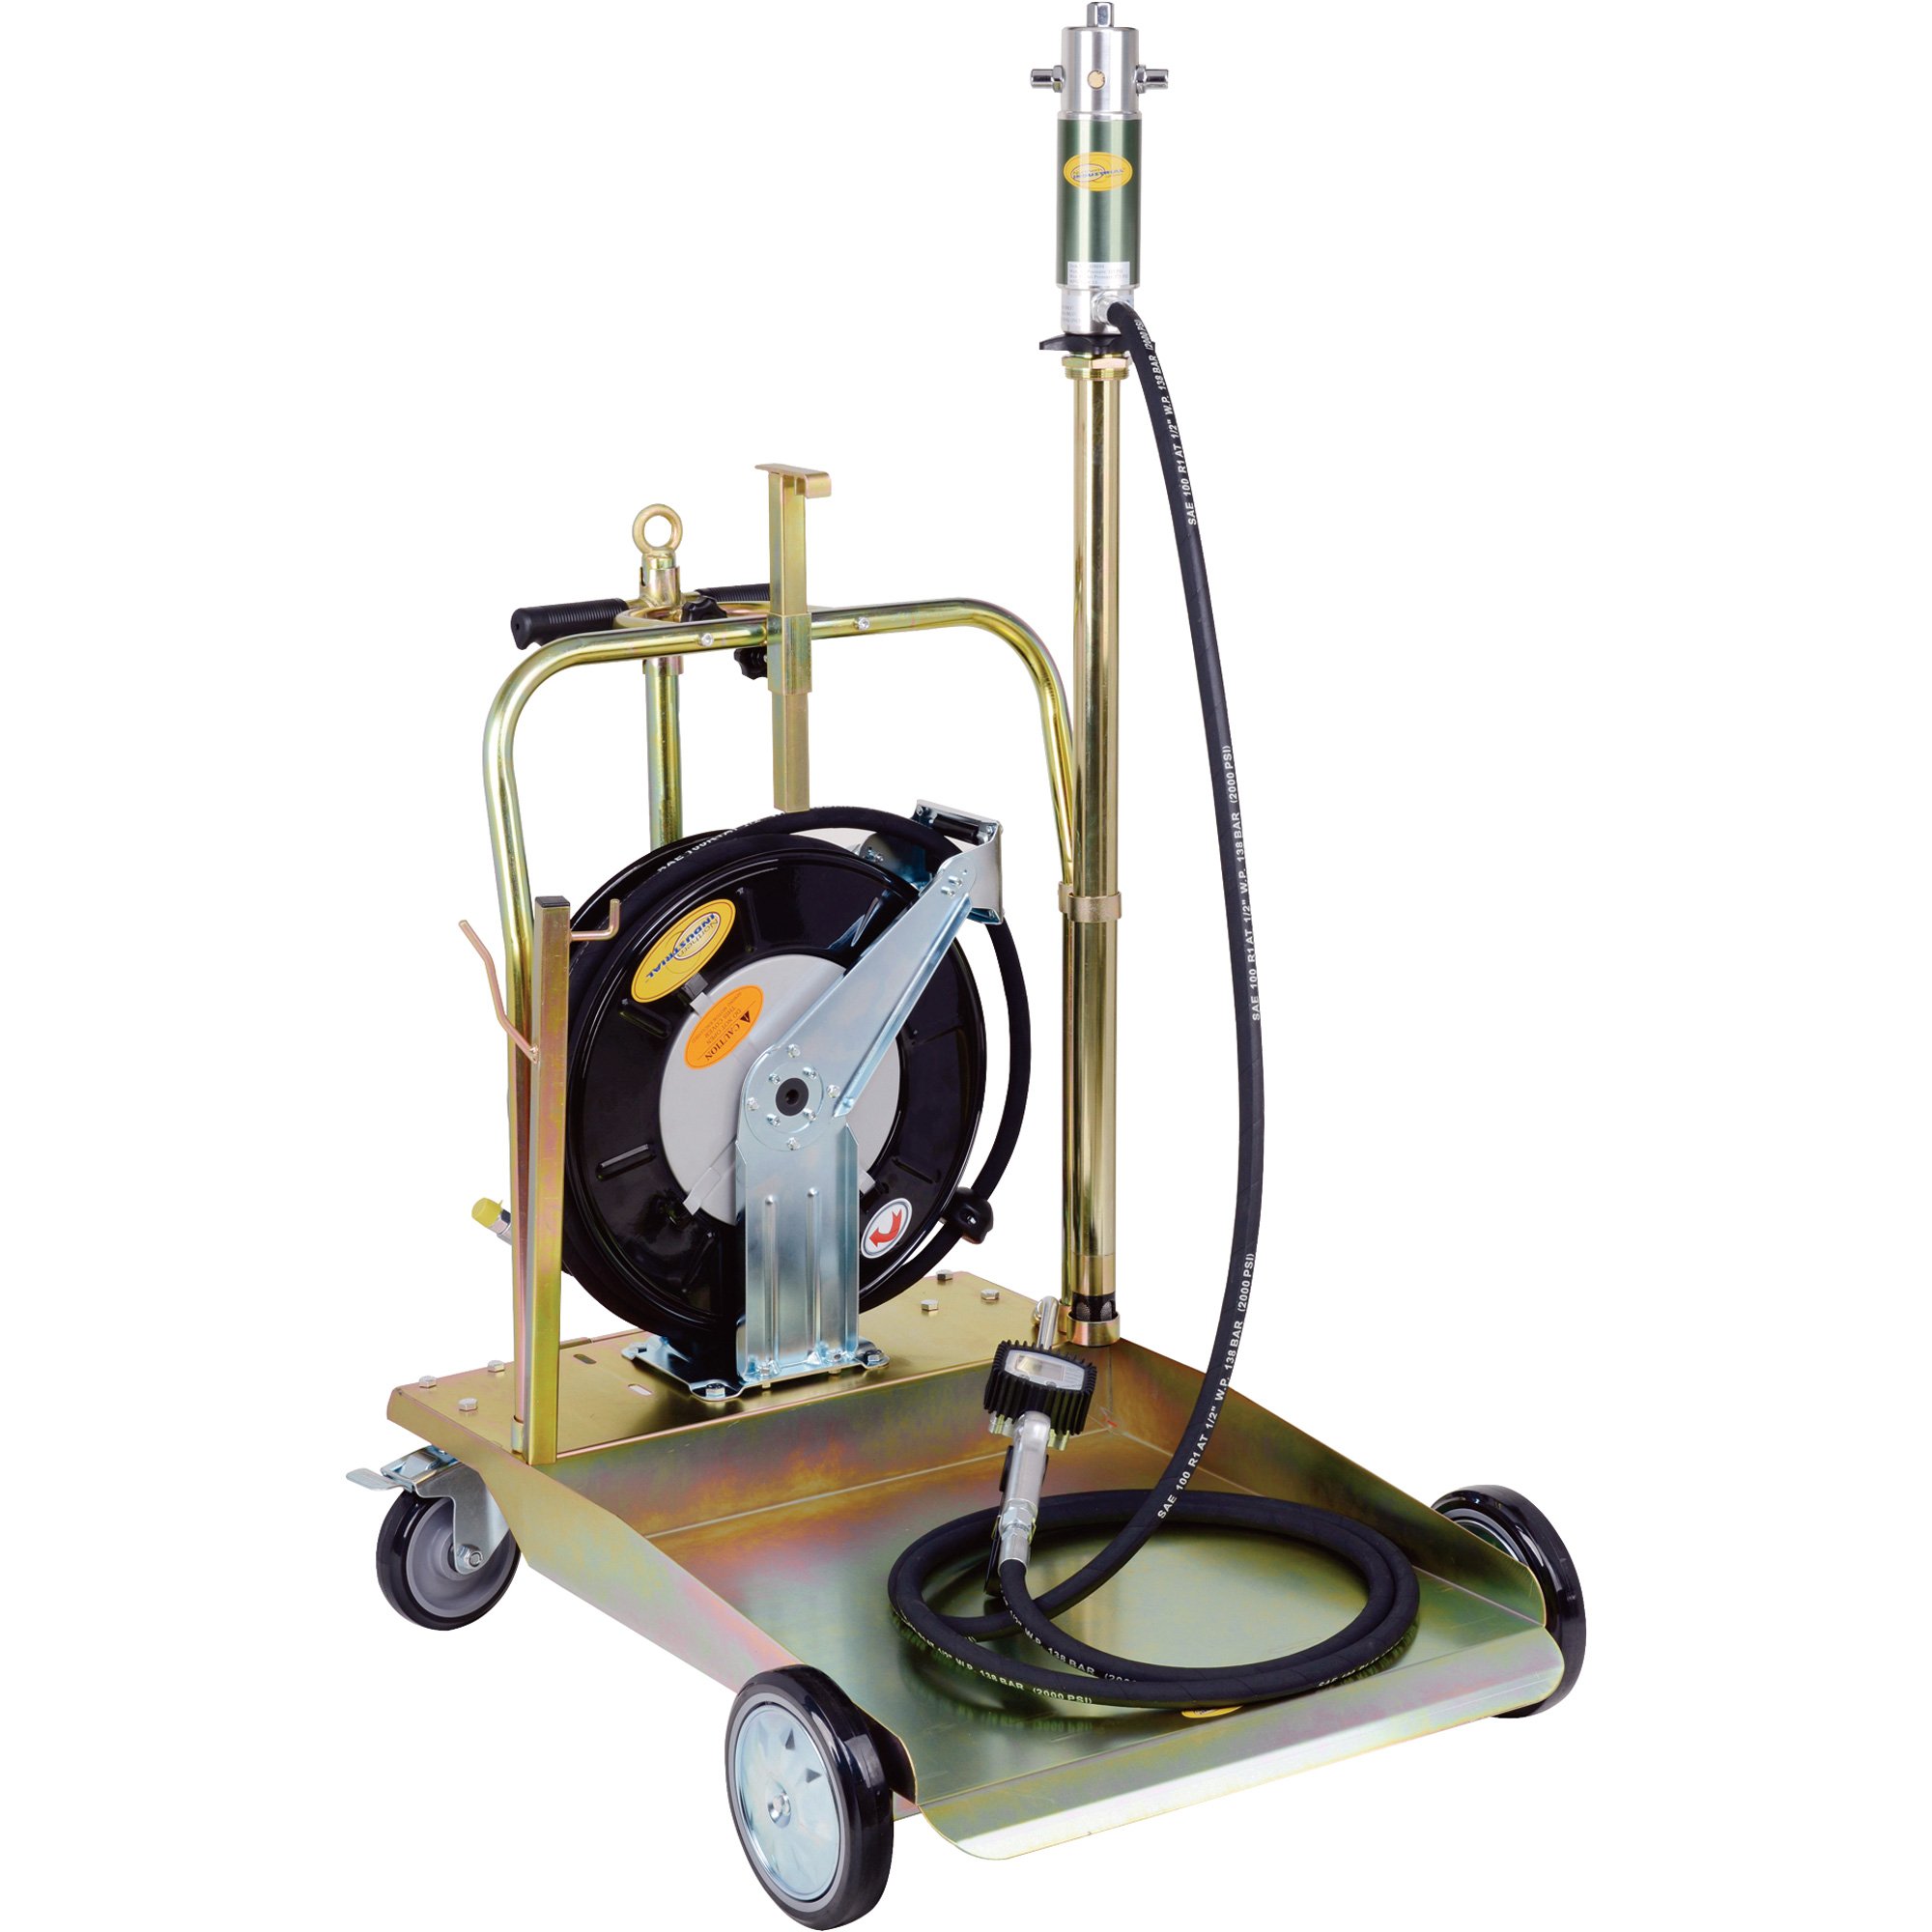 Please See Replacement Item# 58283. Northern Industrial Tools 5:1 Mobile Oil  Pump Kit — 115 PSI, Hose, Digital Valve, Trolley